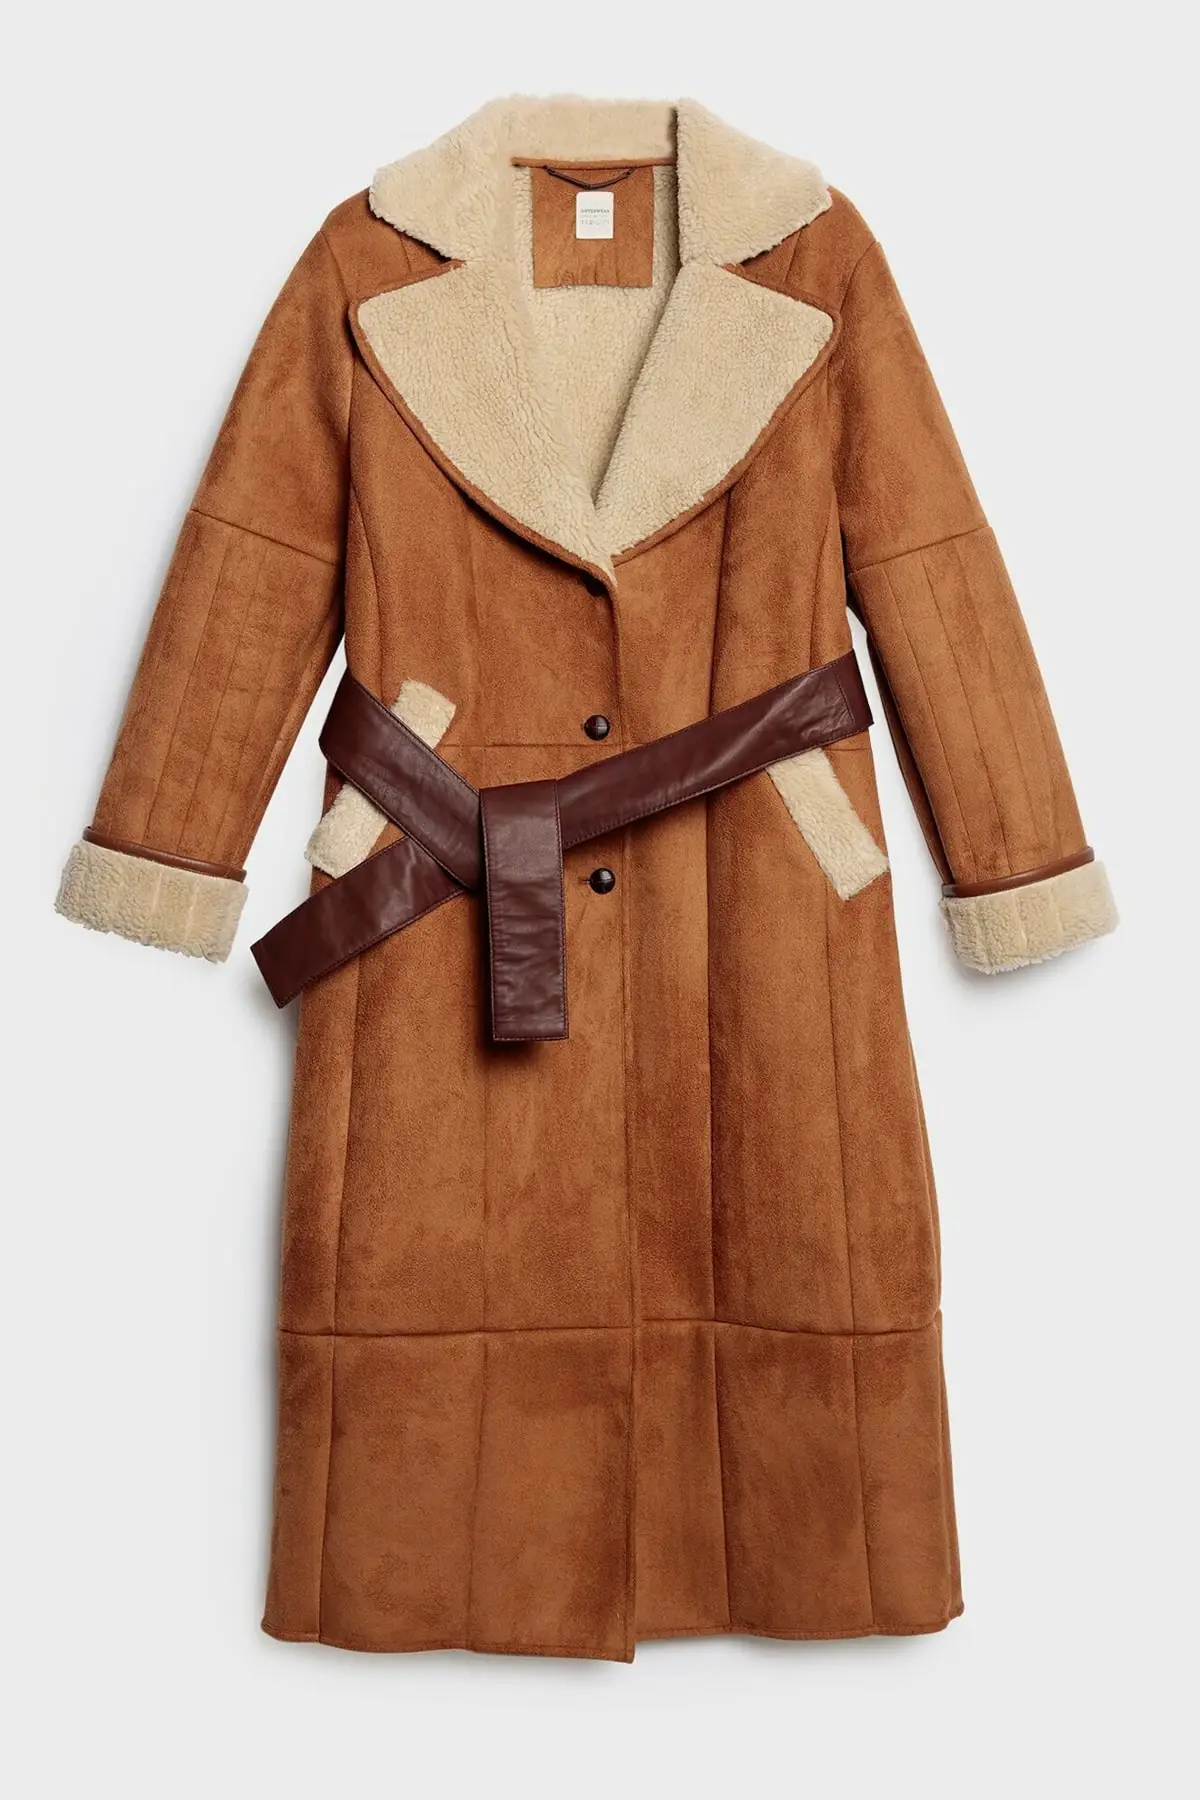 Women's Tan Long Coats Brown Belt Polyester Long Sleeve Thick Stylish Elegant Useful 2021 Winter Autumn Fashion Outerwear Coats women coats ladies elegant long wool coat with belt solid color long sleeve chic outerwear ladies overcoat autumn winter 2021